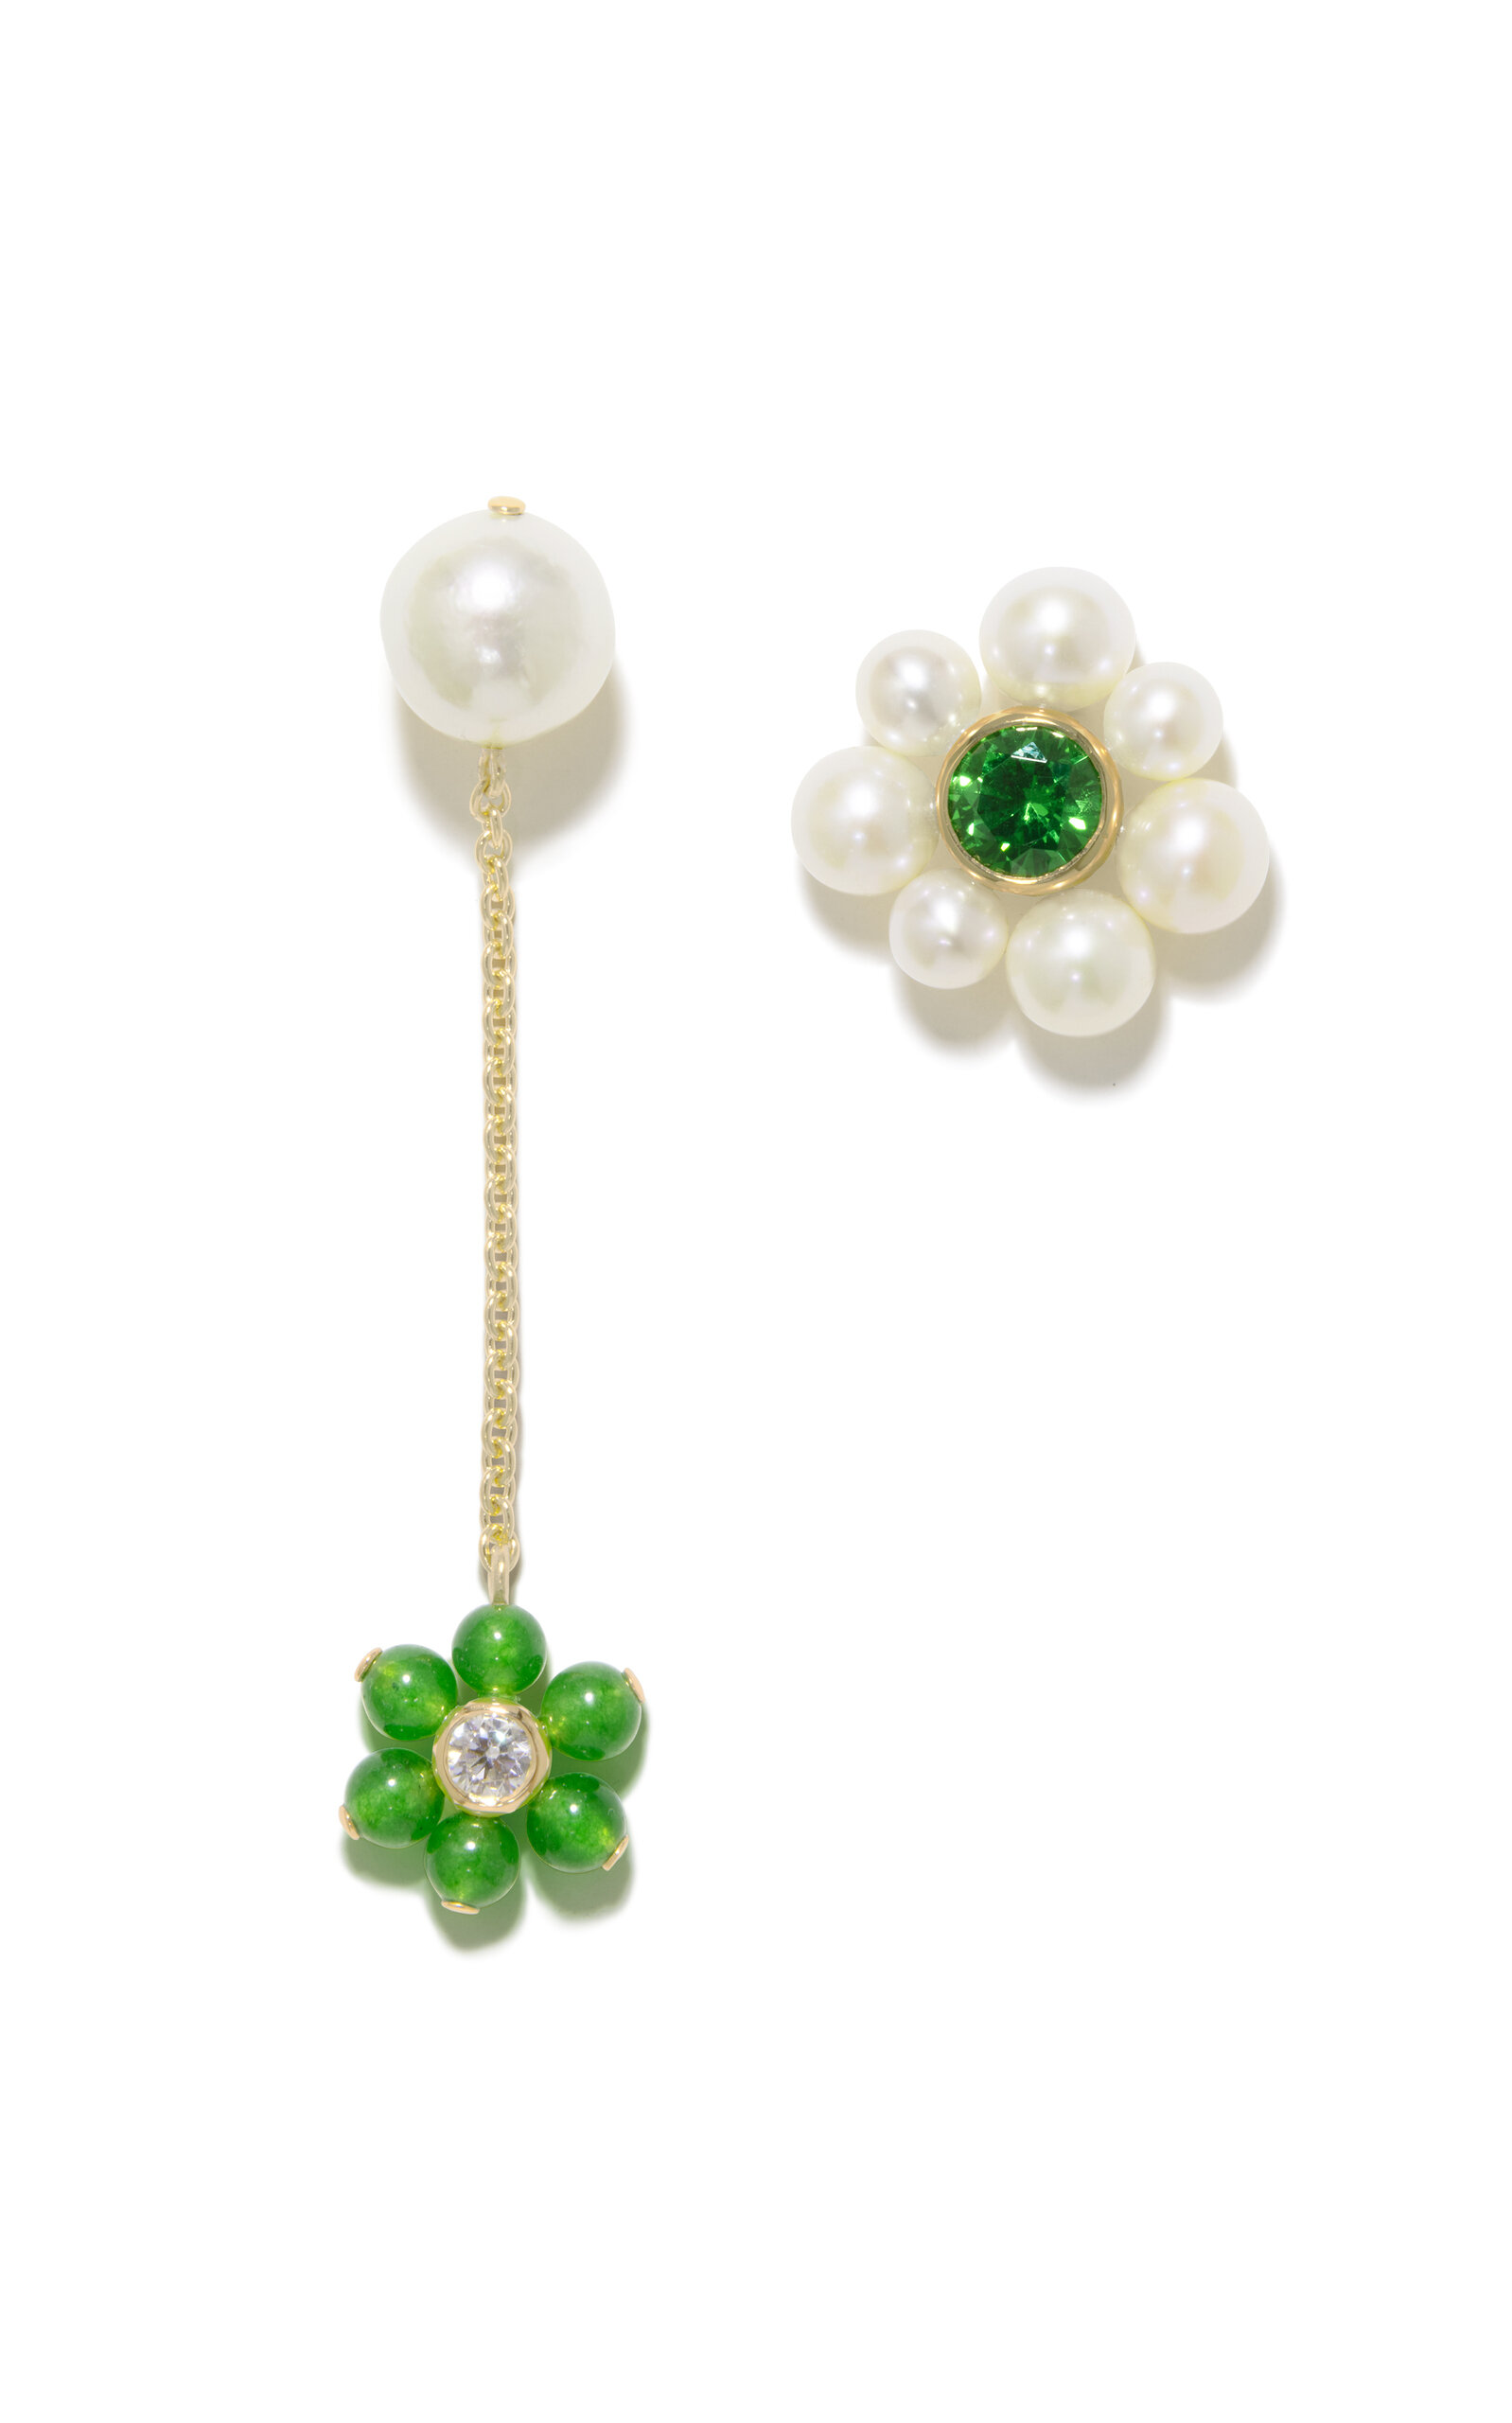 Not Brainwashed (Yet) Mismatch Pearl and Jade Earrings